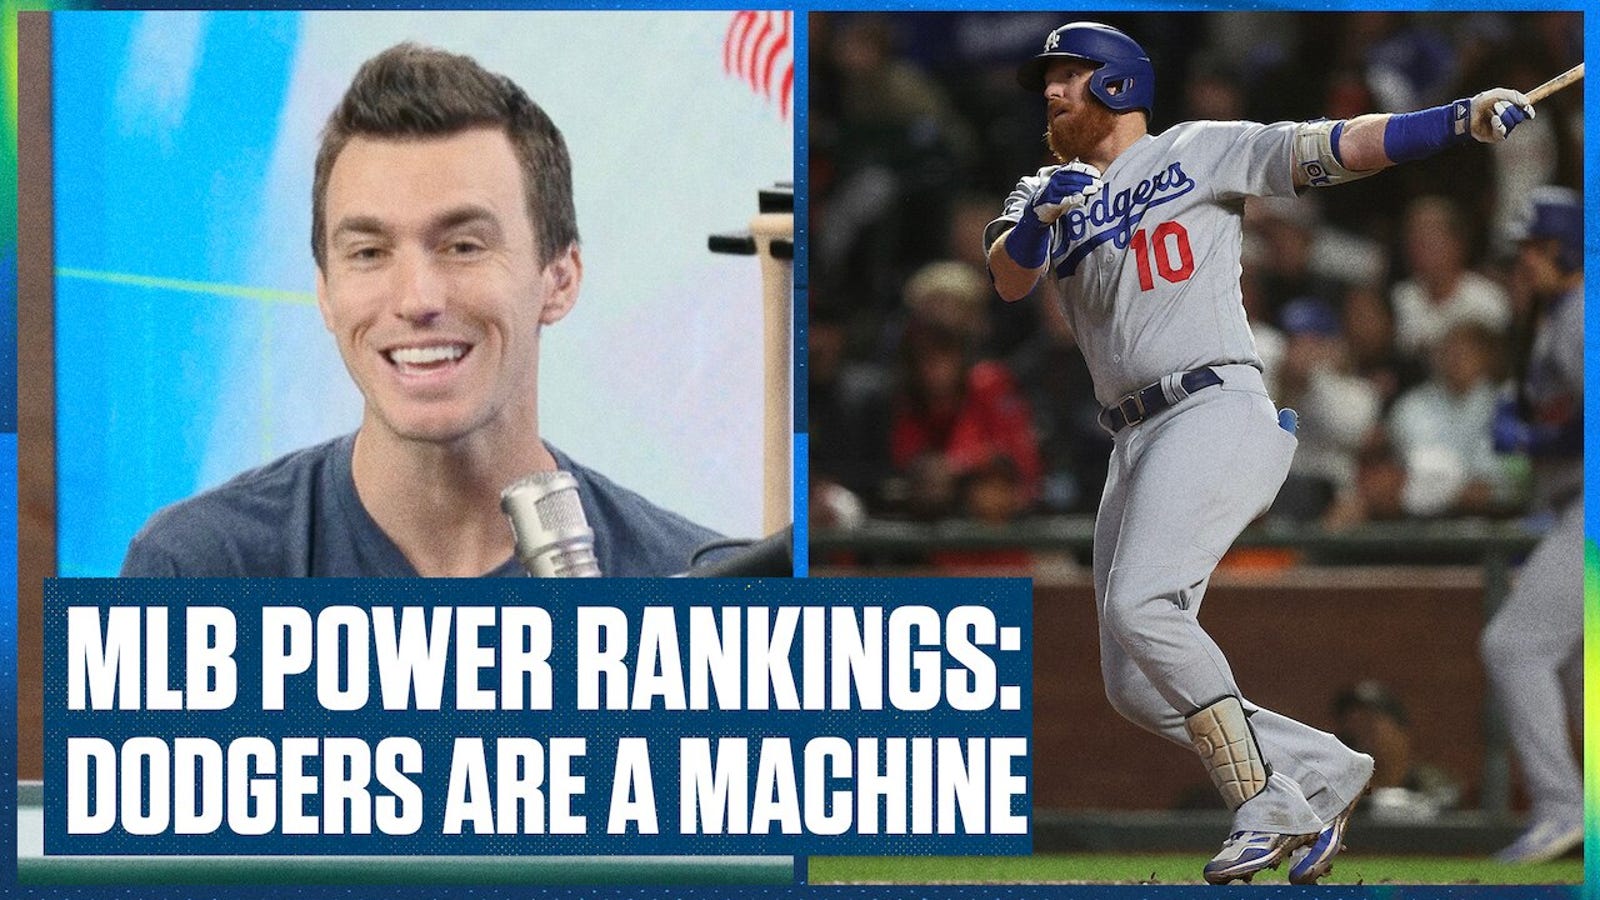 MLB Power Rankings: Astros & Dodgers are STILL the top teams in baseball 